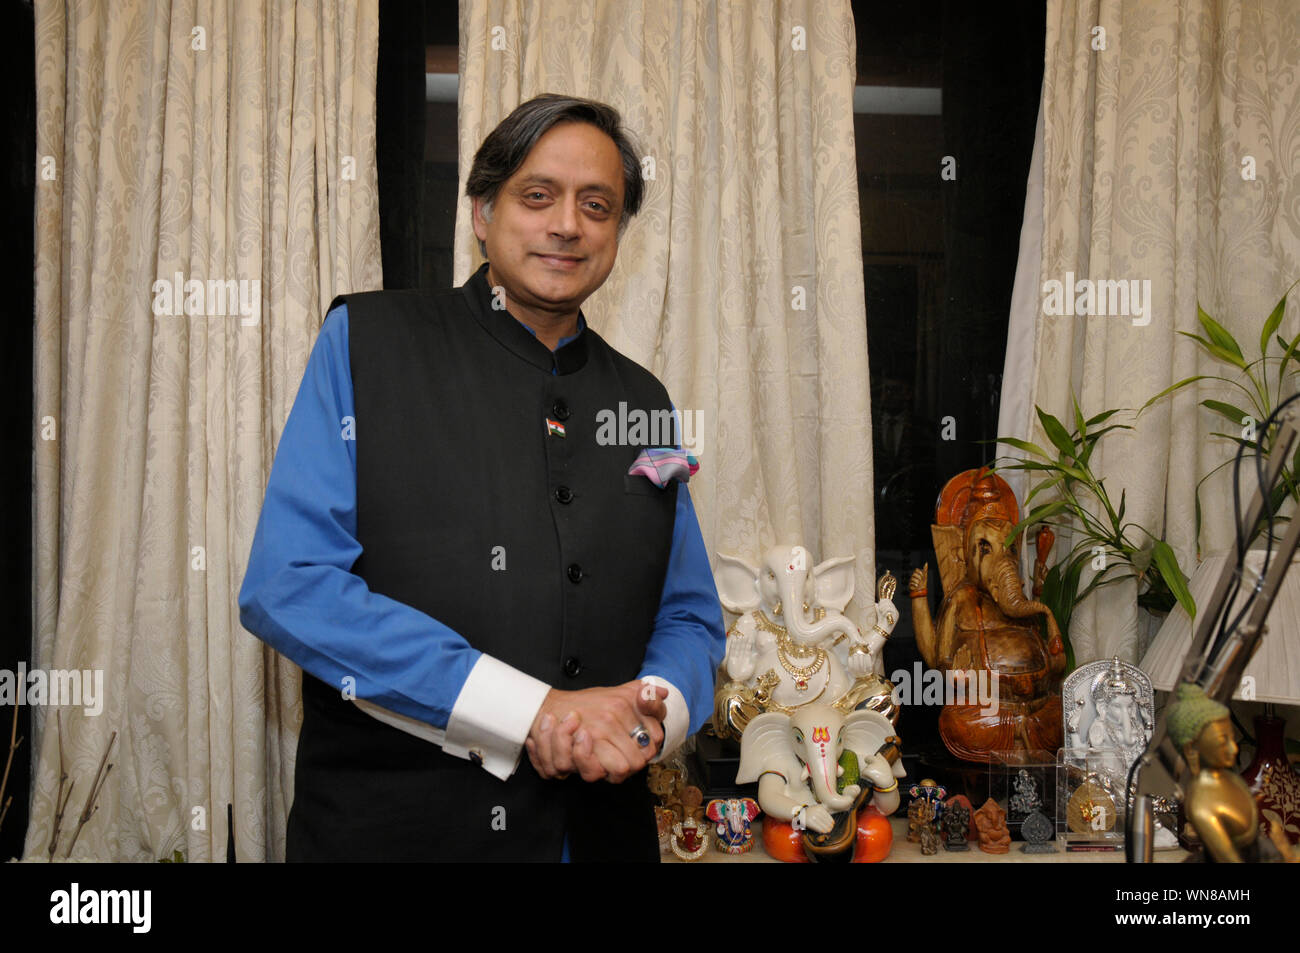 Shashi Tharoor is an Indian politician of Congress party, writer and a former career international diplomat who is currently serving as Member of Parl Stock Photo